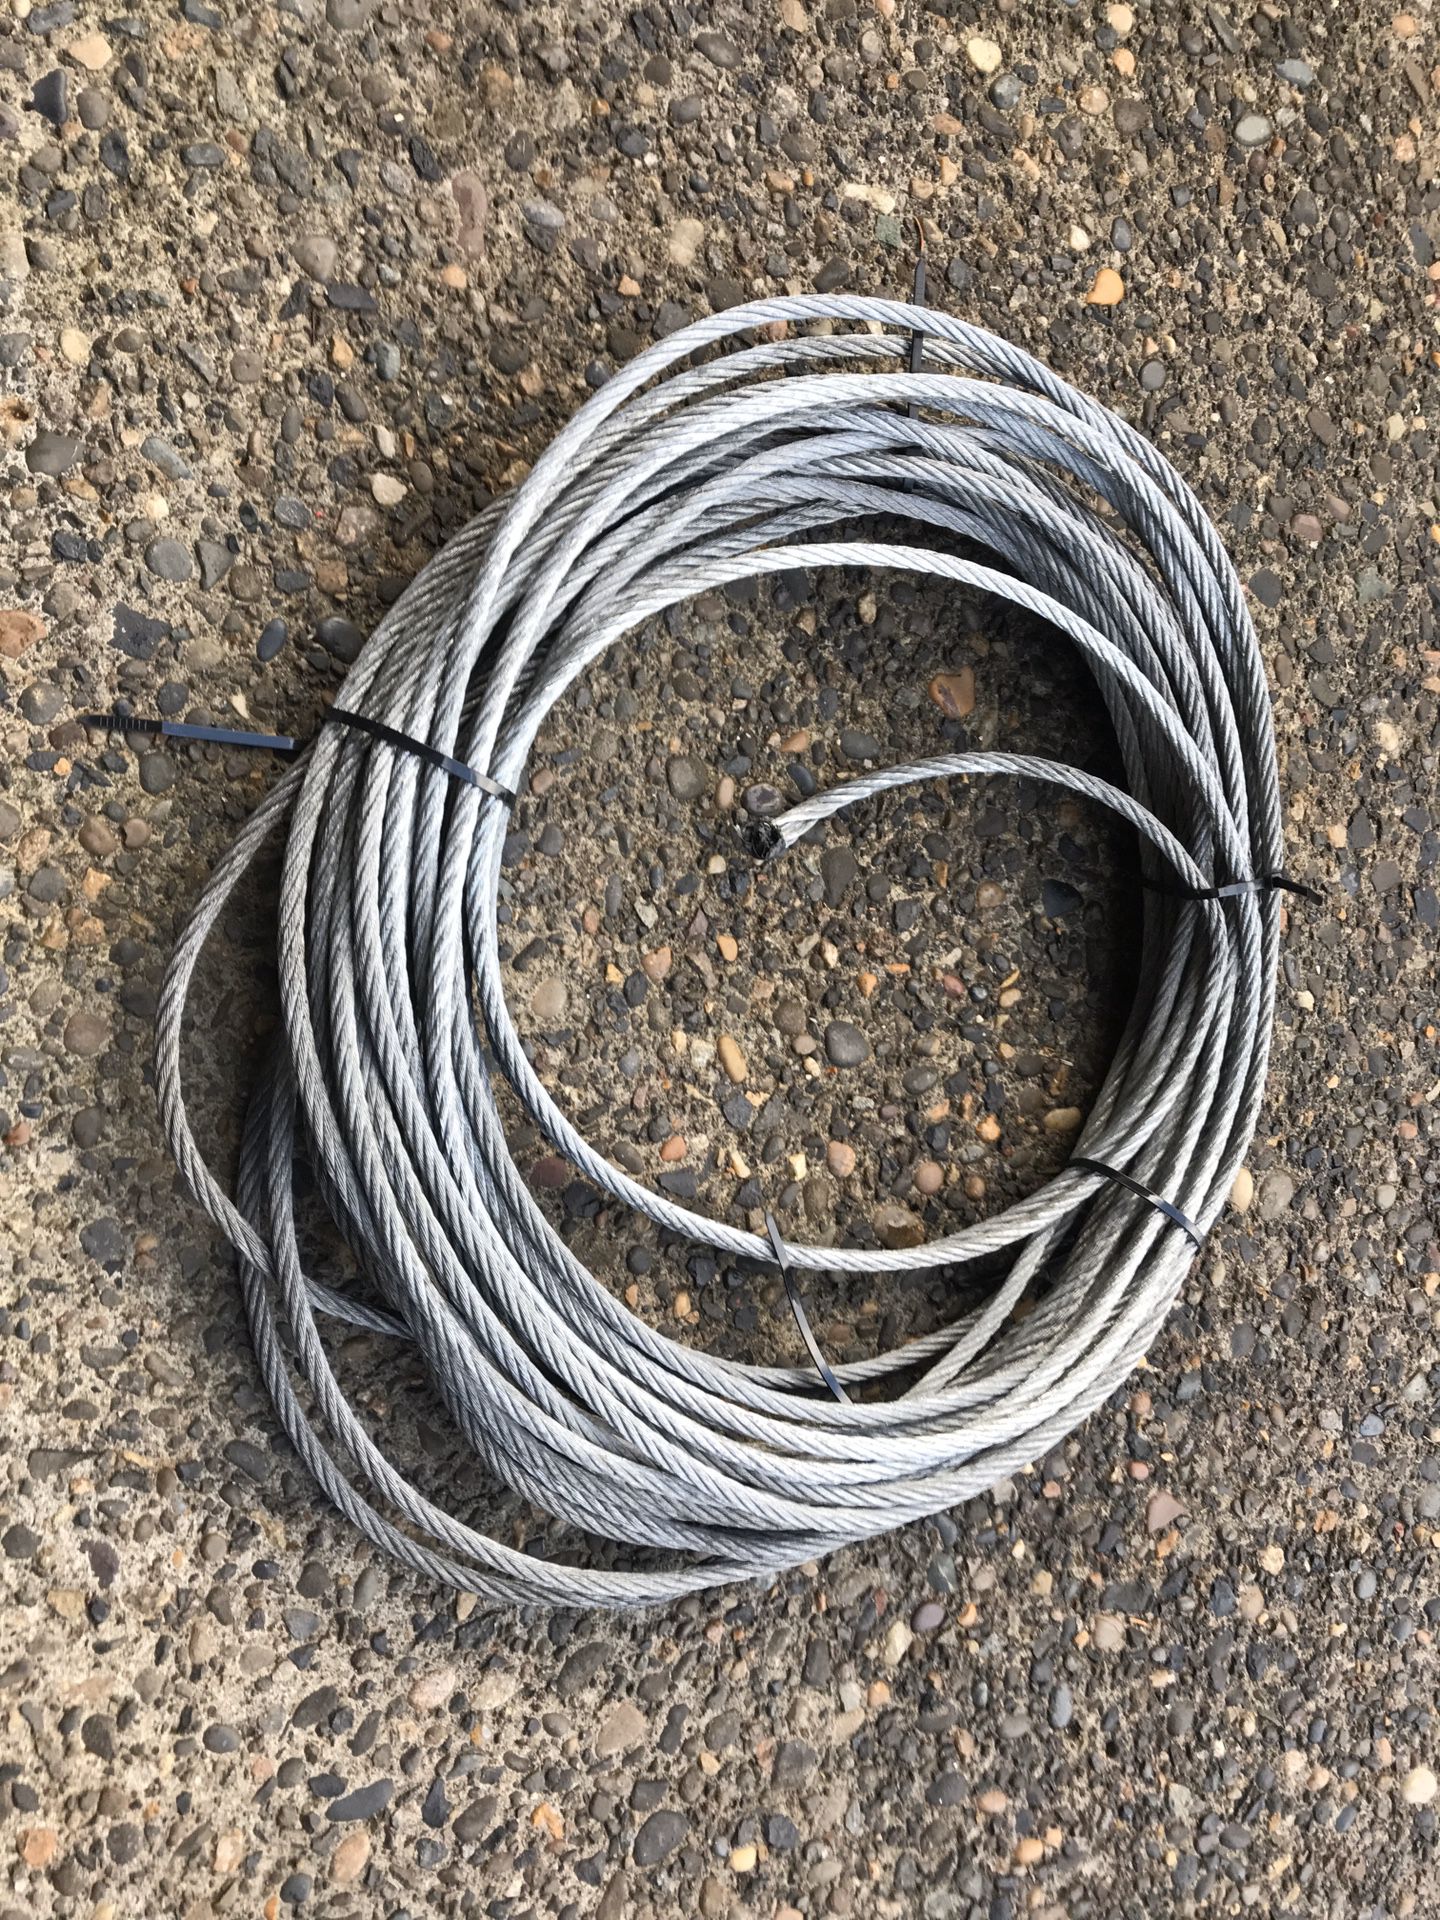 5/16” (?) X 100’ winch cable